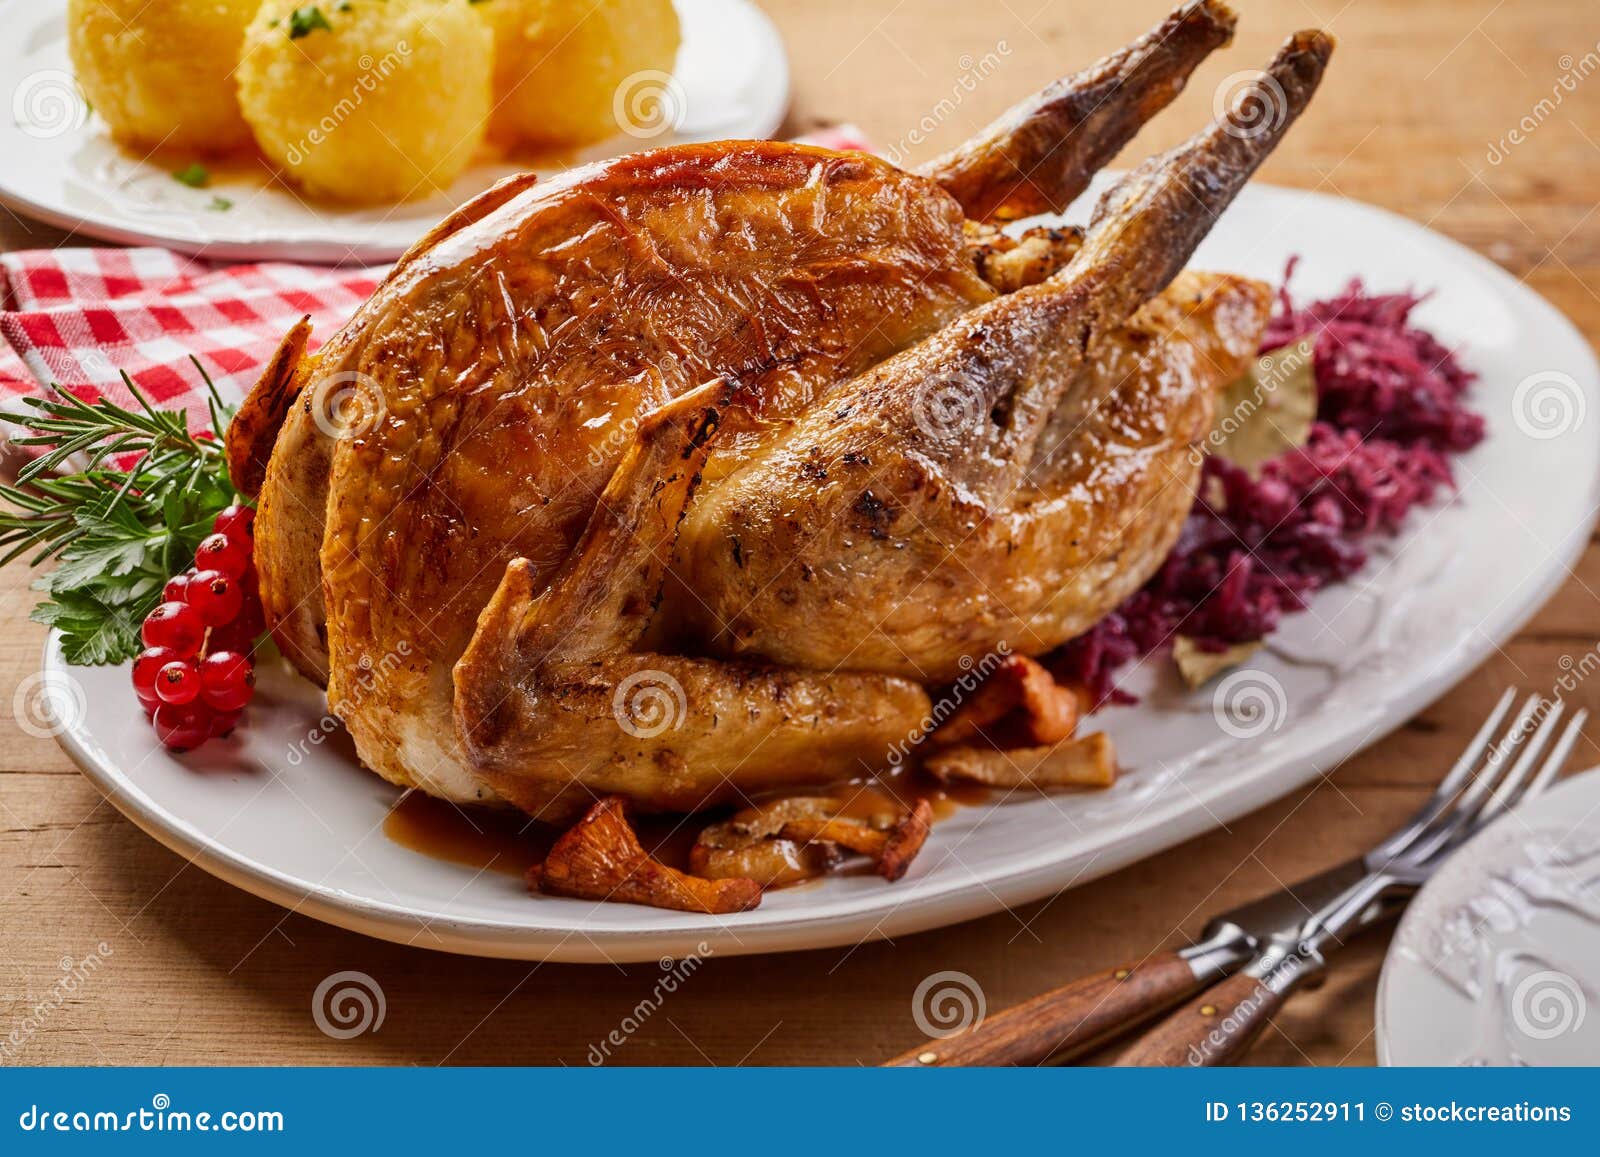 crispy roasted pheasant with red cabbage